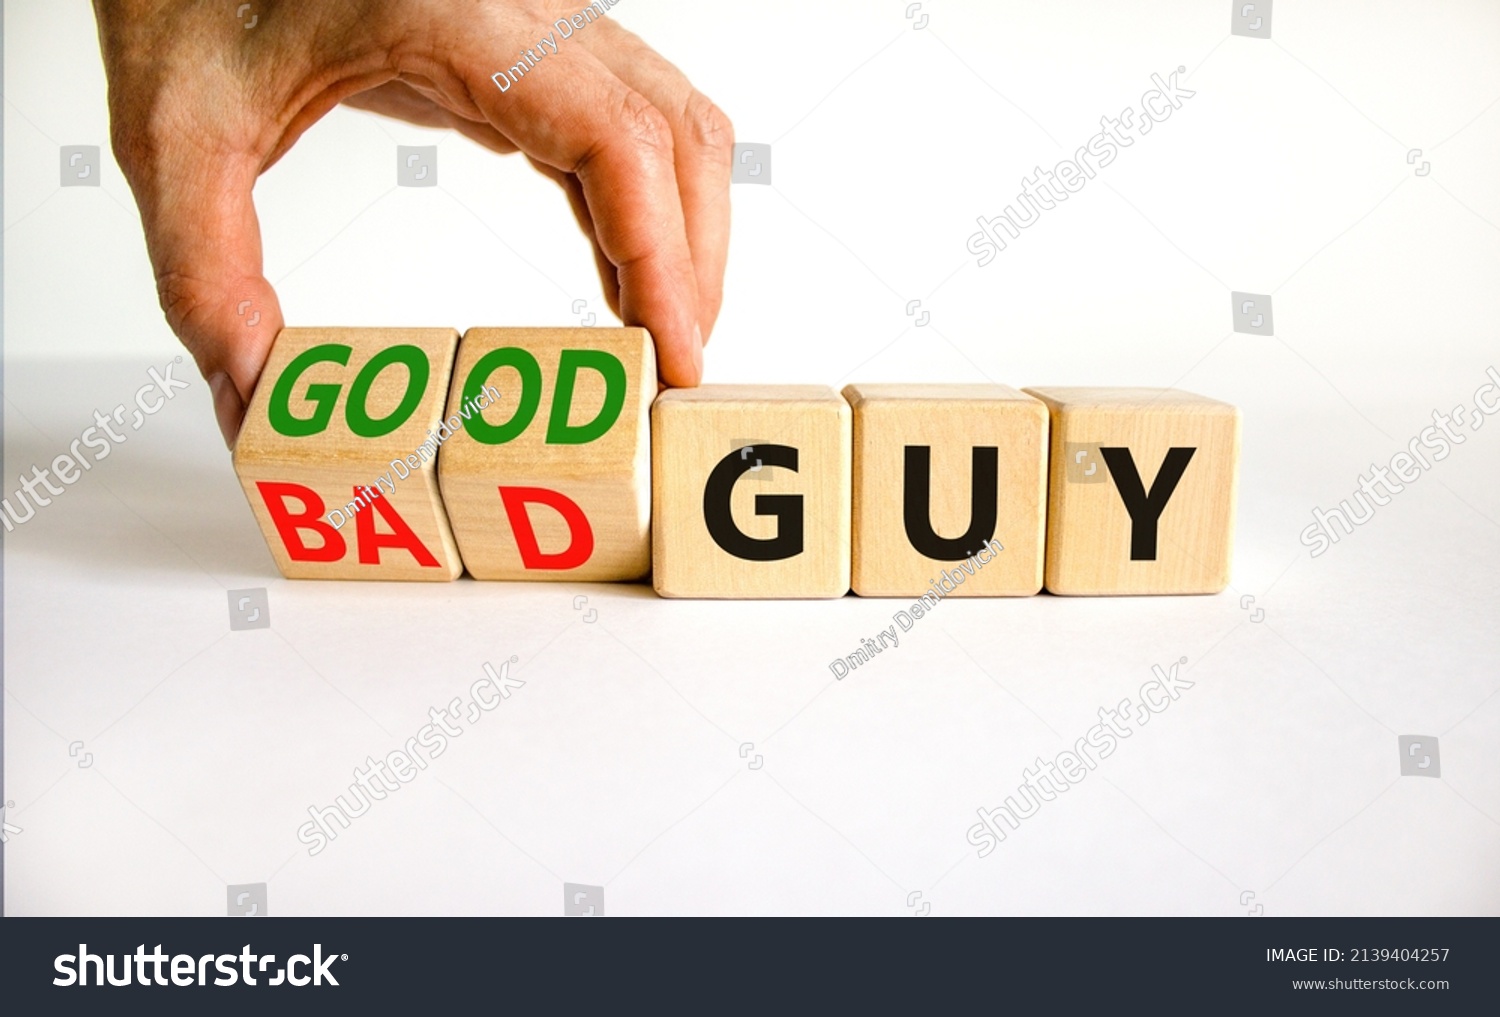 Good or bad guy symbol. Businessman turns cubes and changes concept words Bad guy to Good guy. Beautiful white background. Business psychological good or bad guy concept. Copy space. #2139404257